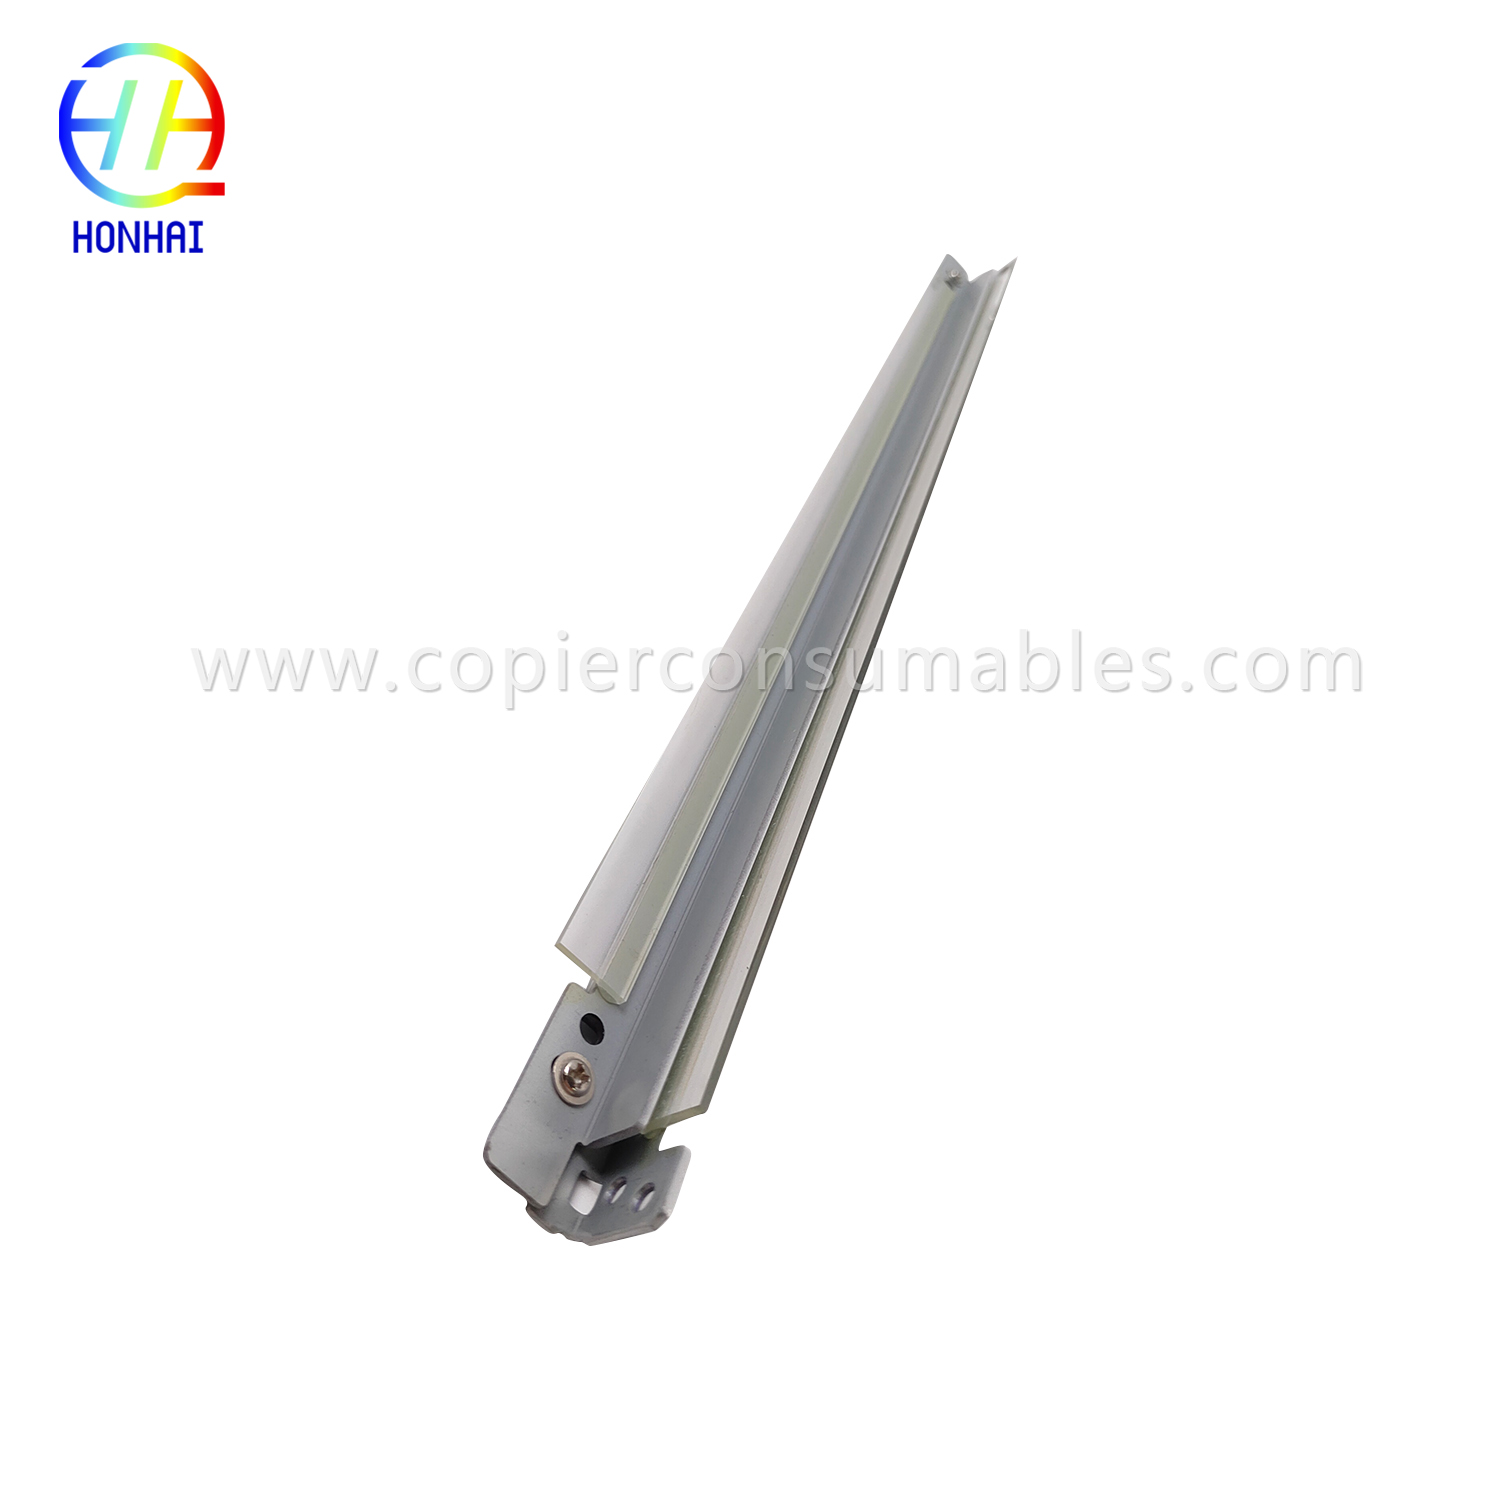 Transfer Belt Cleaning Blade for Ricoh Aficio 1060 1075 2051 2060 2075 MP5500 6000 6001 6002 6500 7000 7001 7500 7502 8000 8001 9001 9002 9100DN (AD041126)  (5)